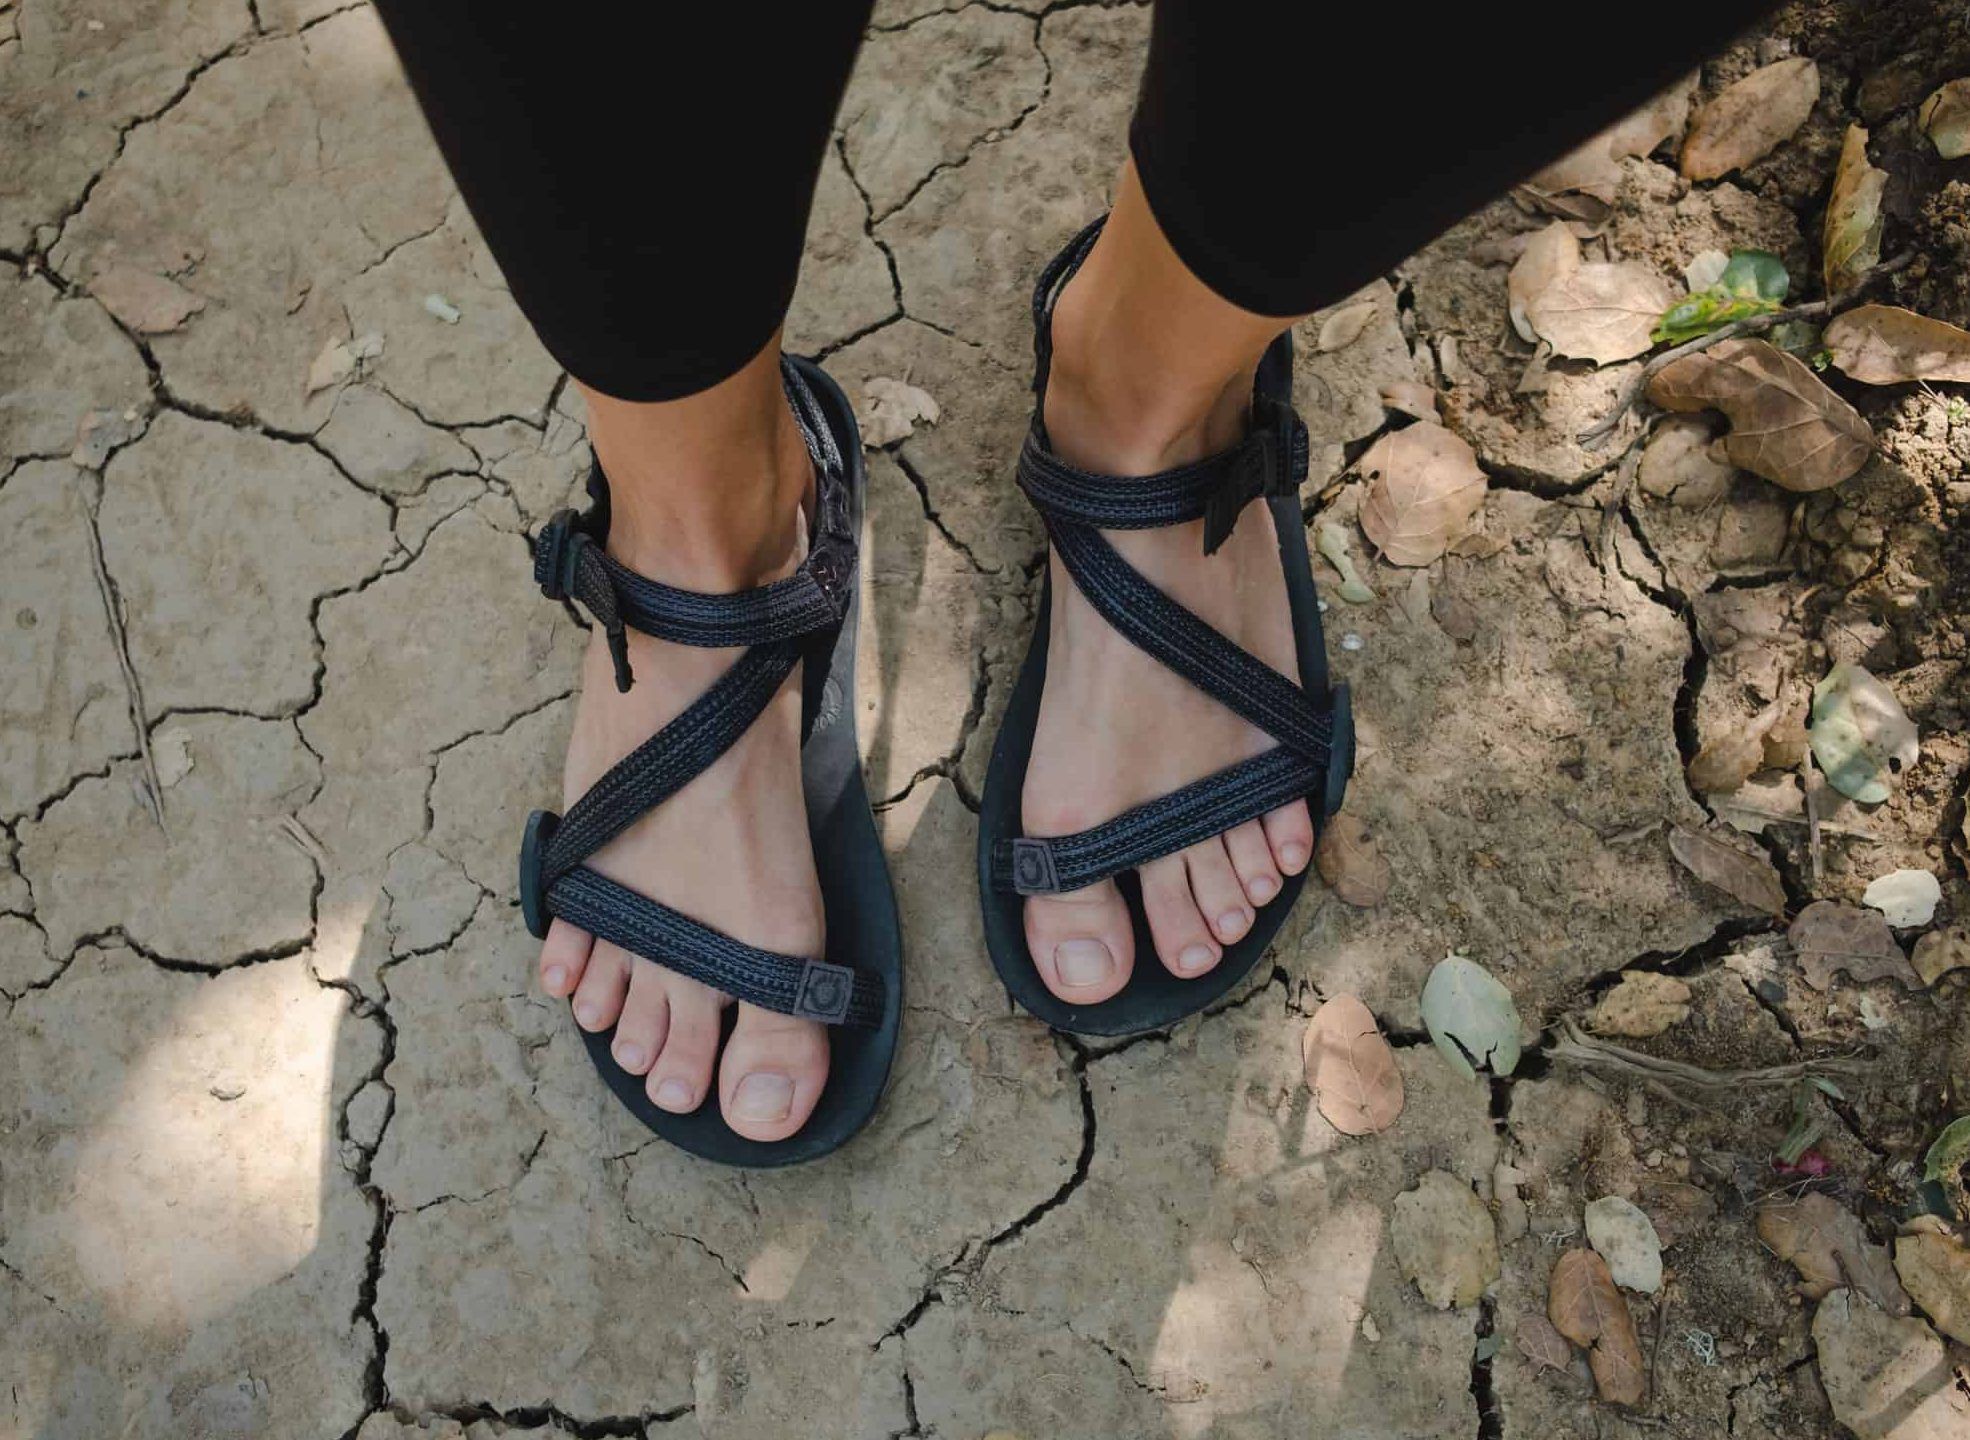 The 10 Best Sandals for Walking of 2021 - ReviewThis